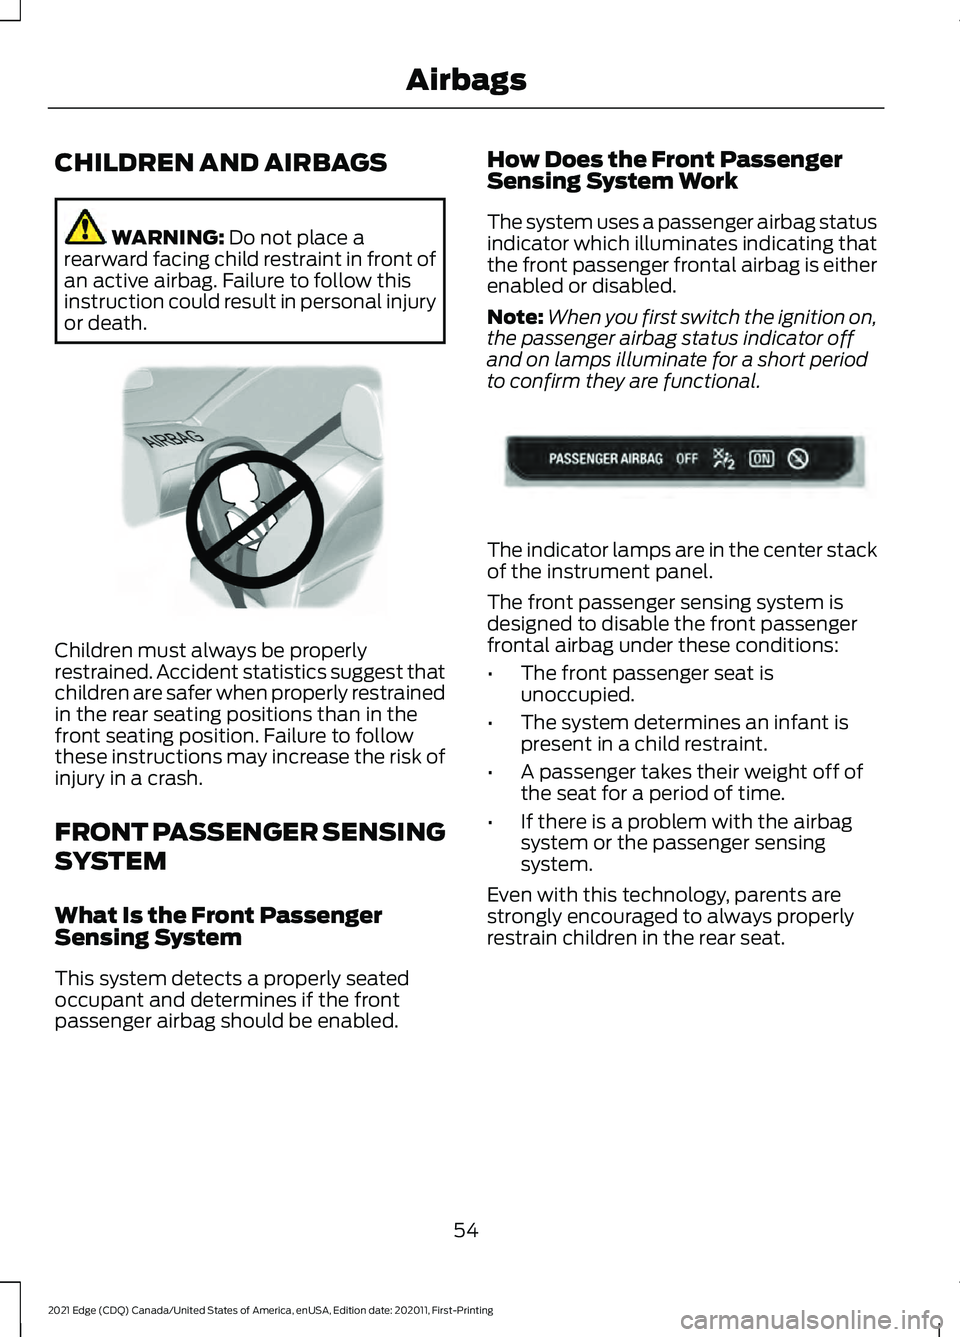 FORD EDGE 2021  Owners Manual CHILDREN AND AIRBAGS
WARNING: Do not place a
rearward facing child restraint in front of
an active airbag. Failure to follow this
instruction could result in personal injury
or death. Children must al